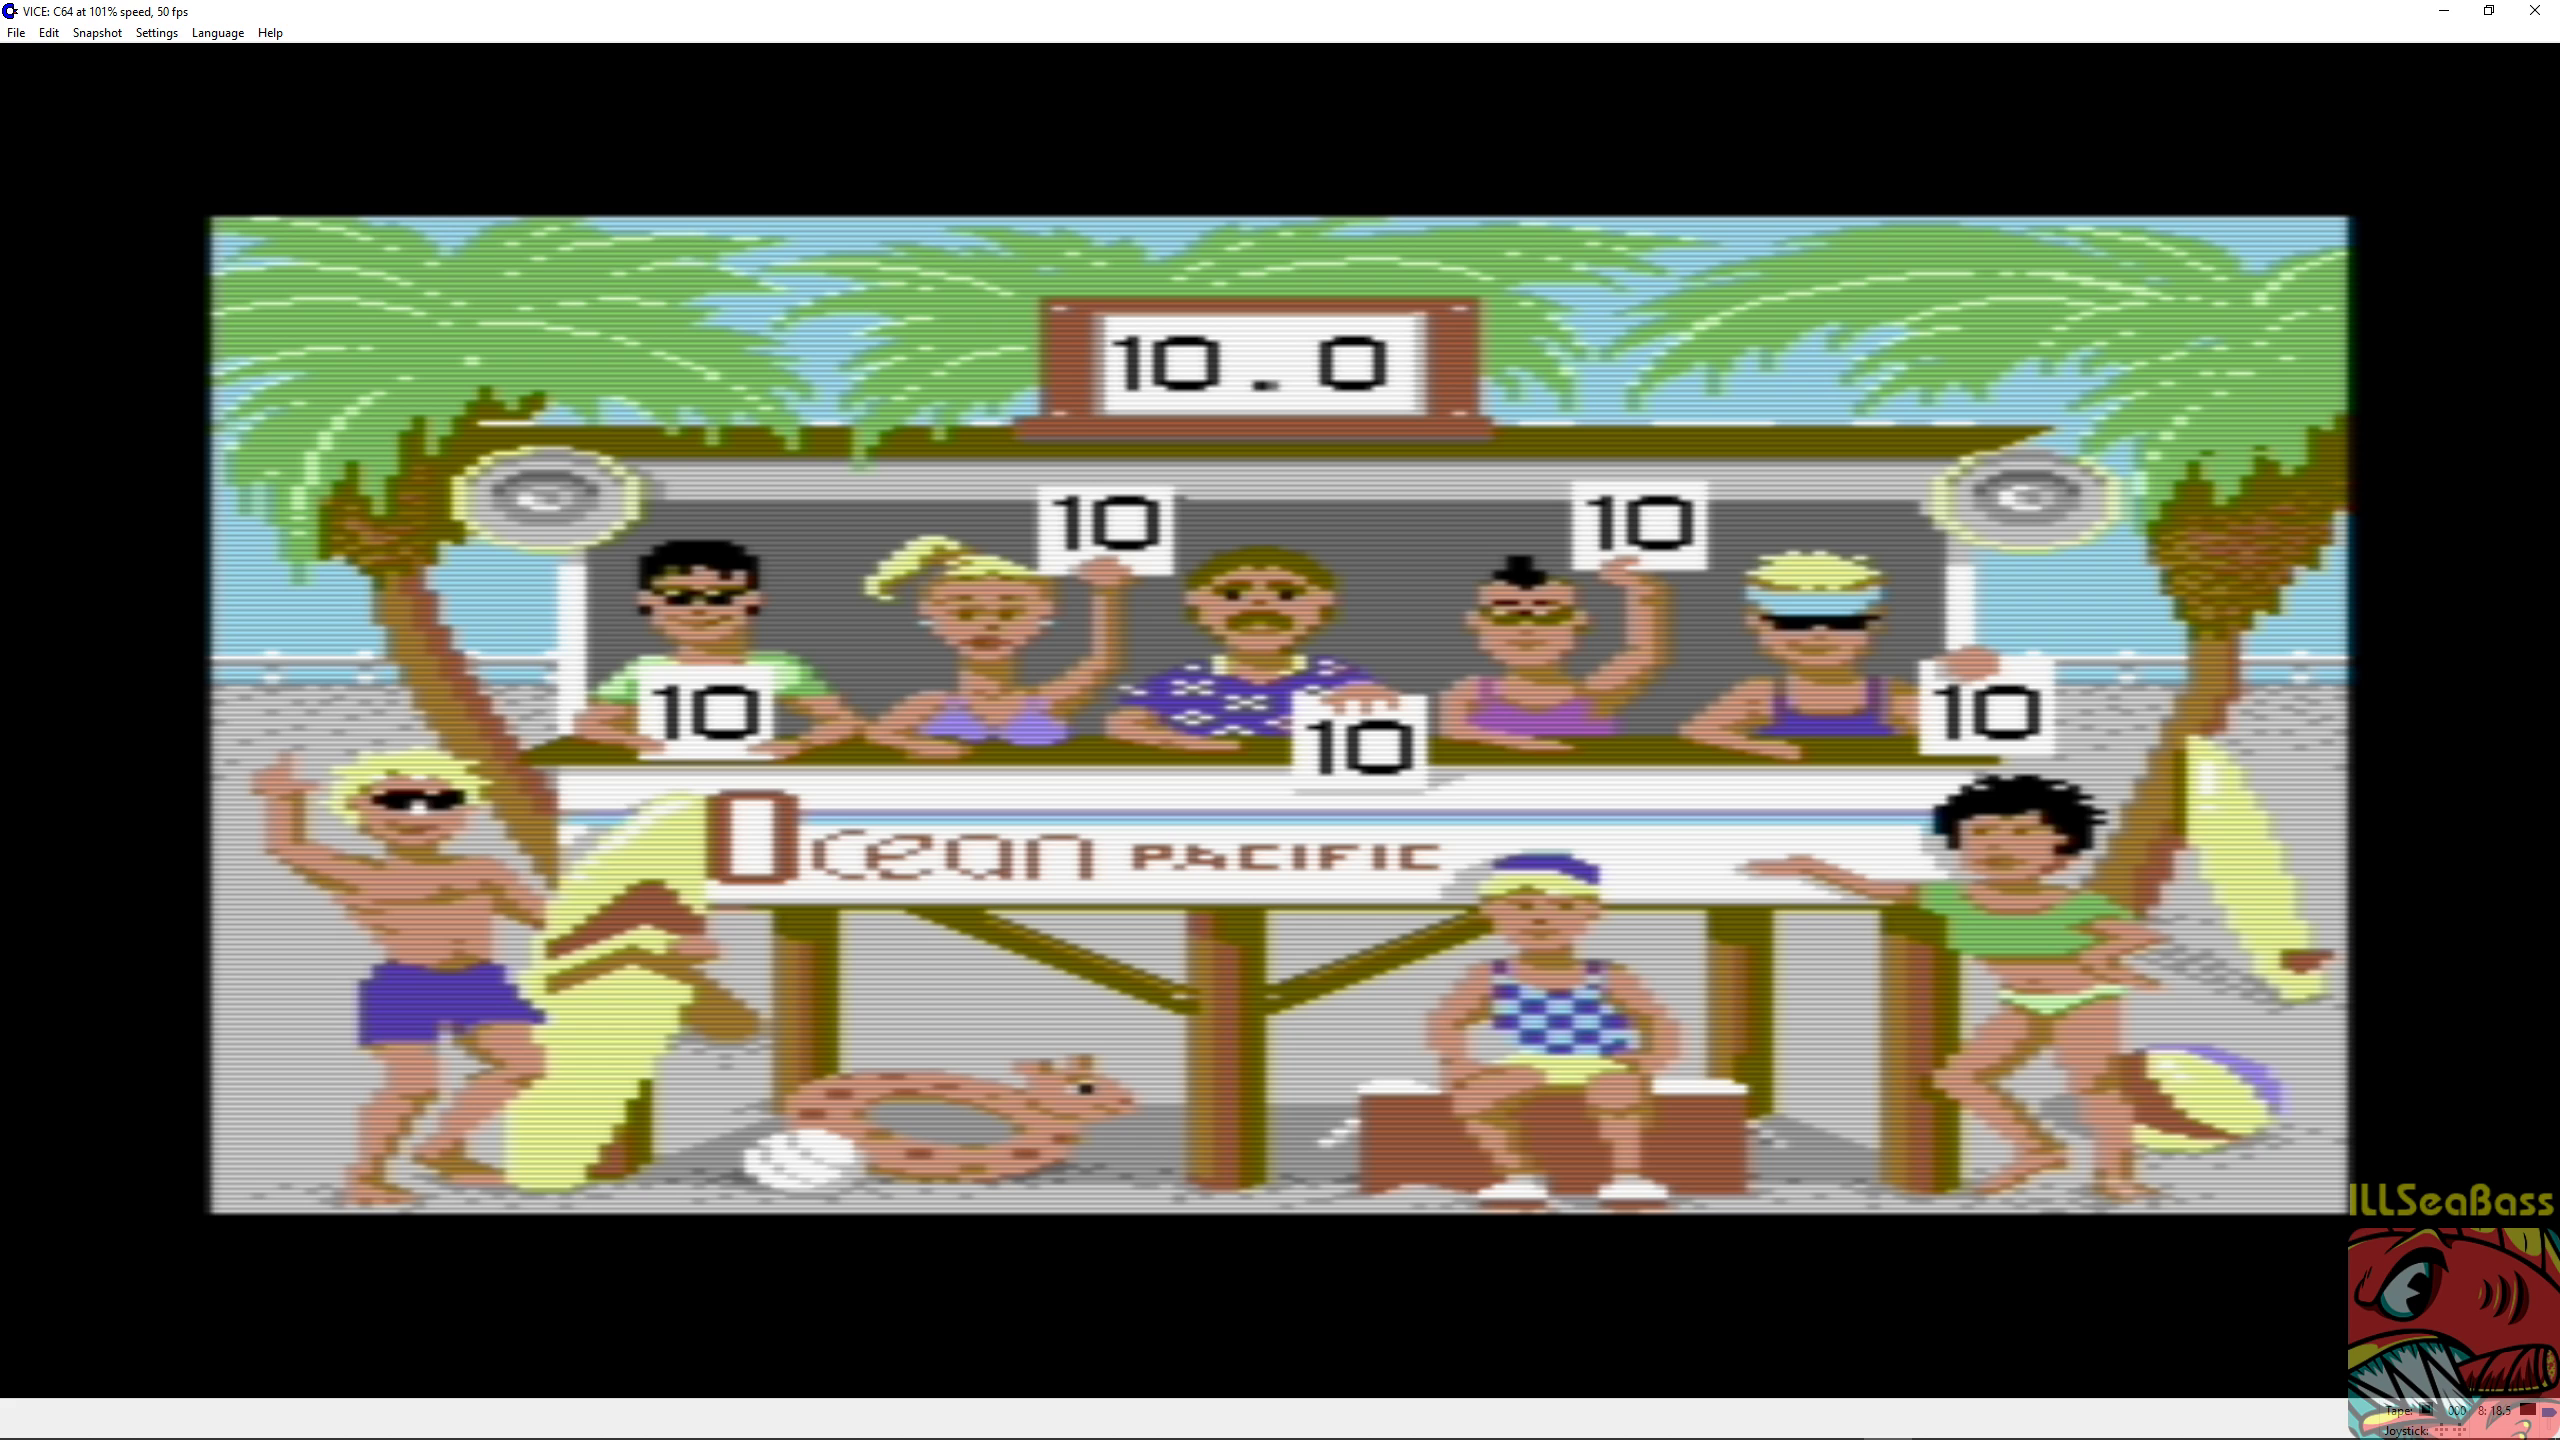 ILLSeaBass: California Games: Surfing (Commodore 64 Emulated) 100 points on 2018-09-03 11:39:04